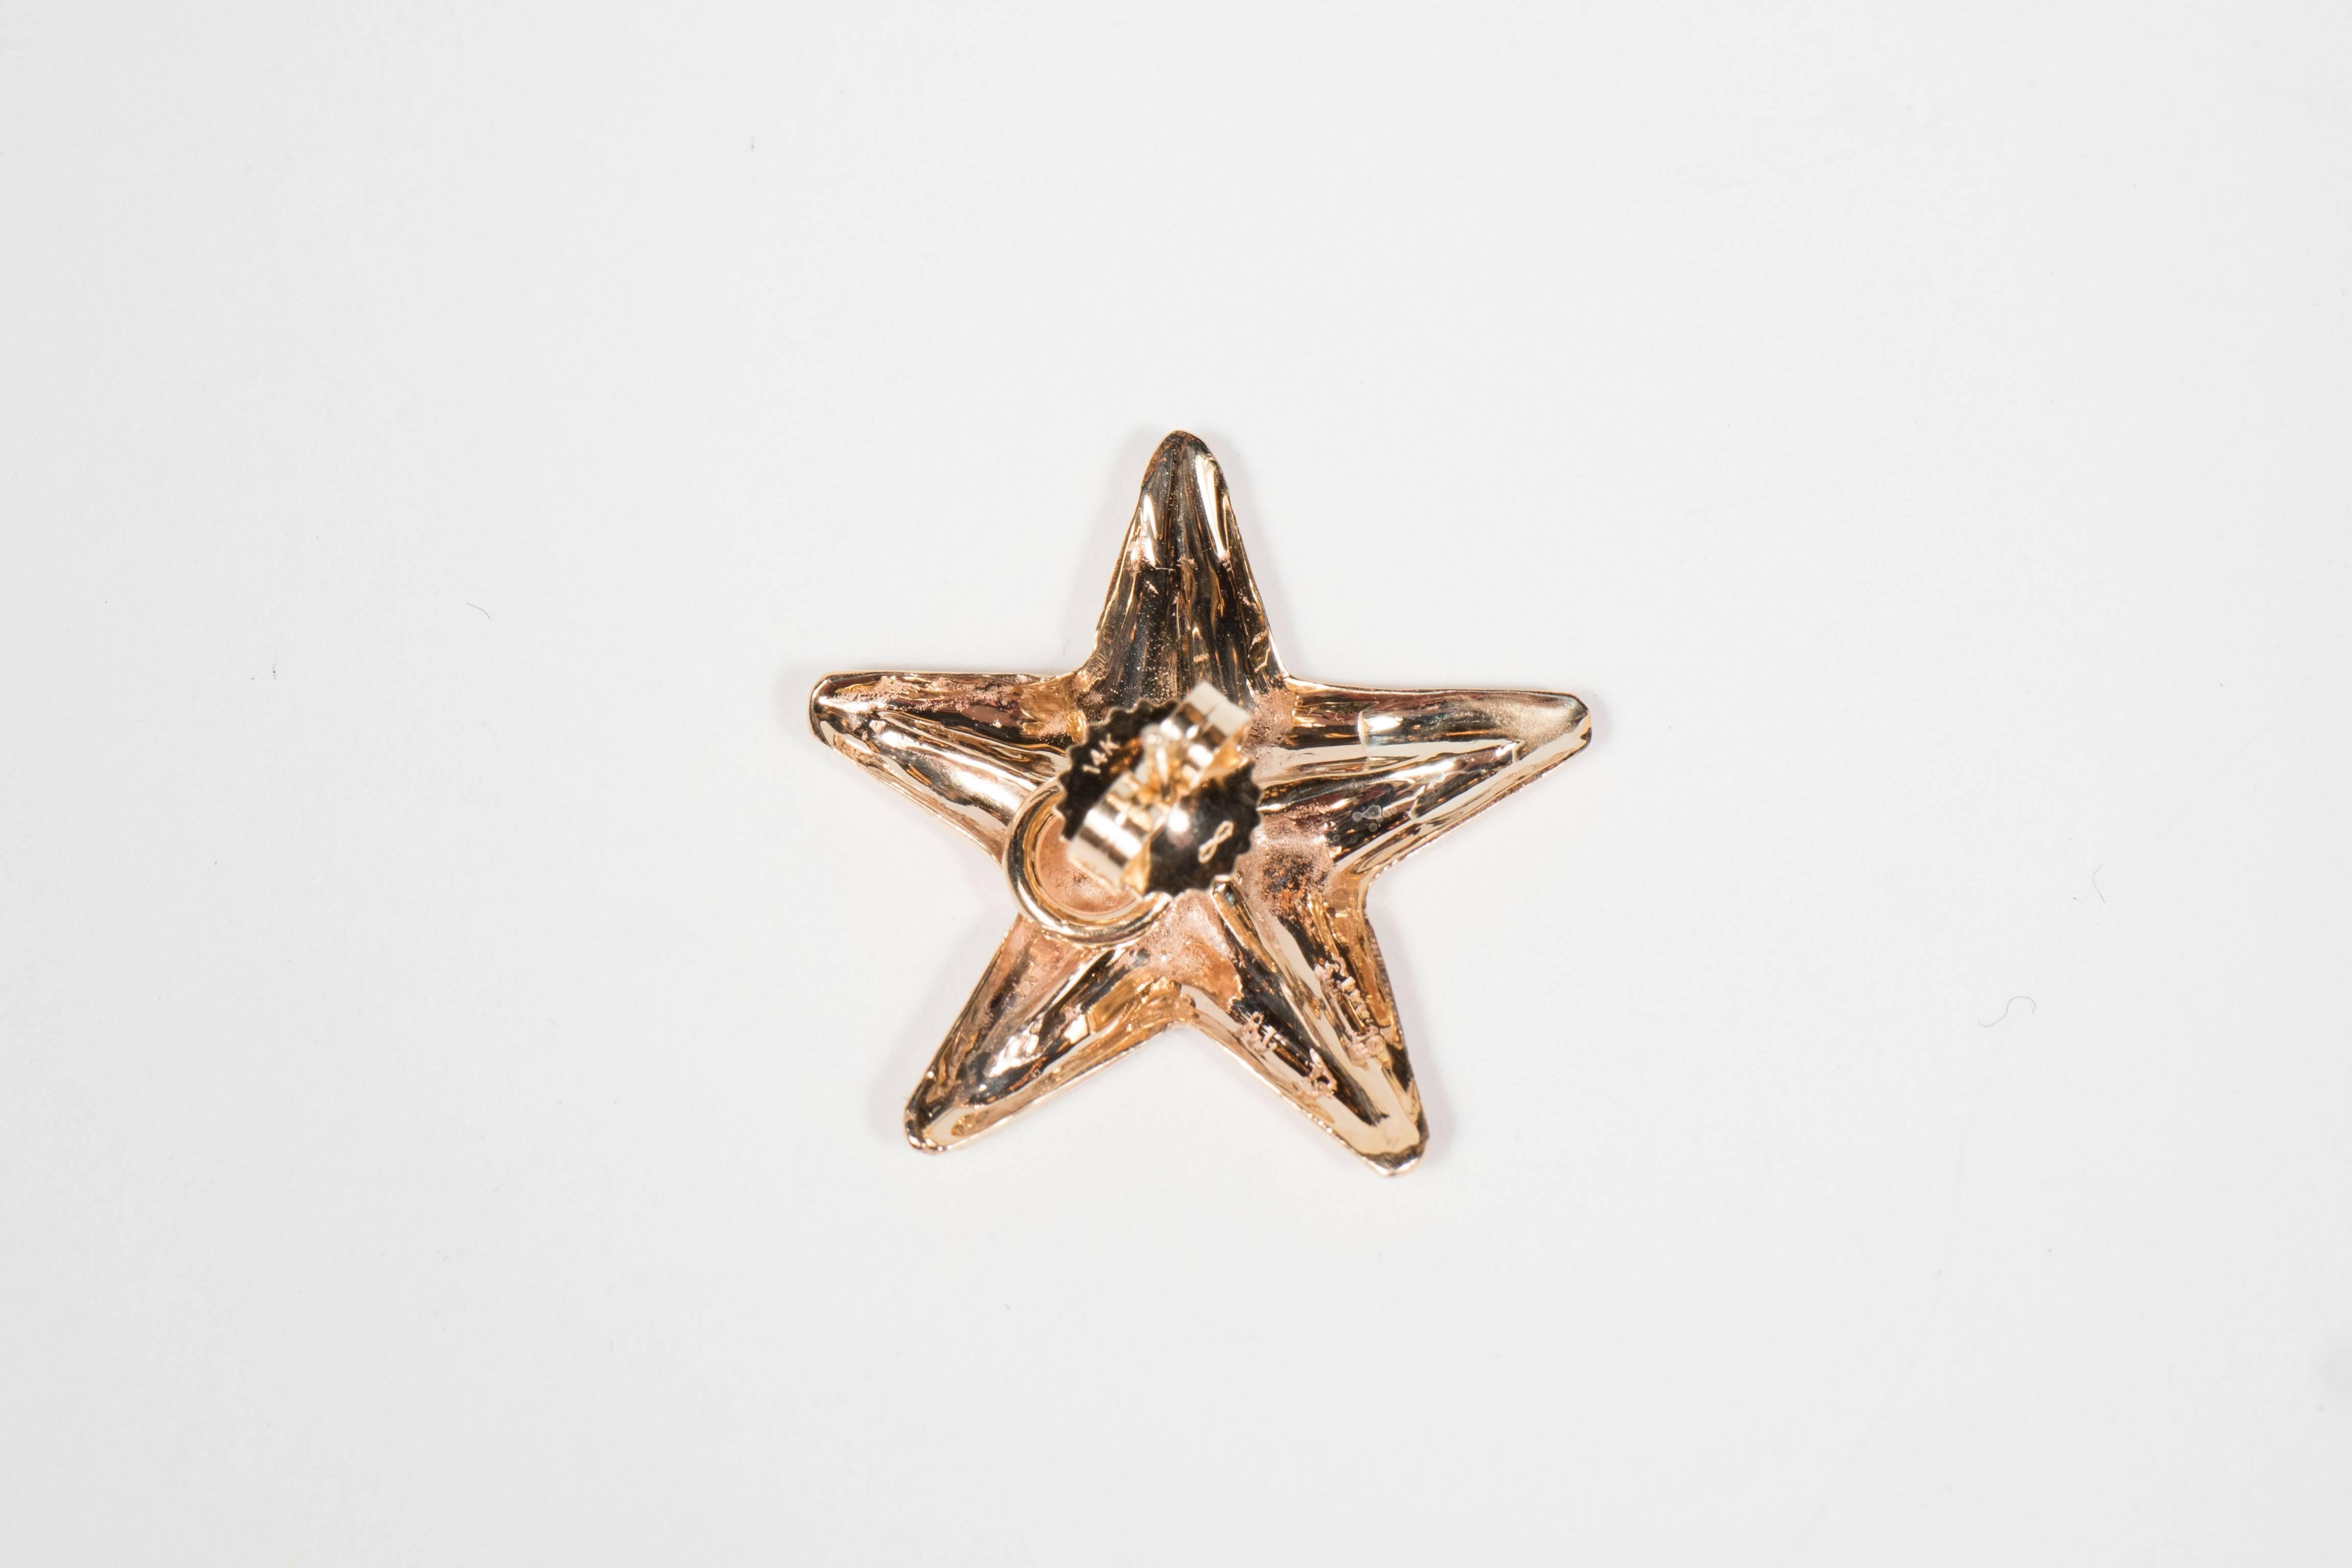 These 18k yellow gold earrings are designed as starfish and they are made by Seaman Shepps.They way 2 grams and bear the mark of Seaman Schepps.